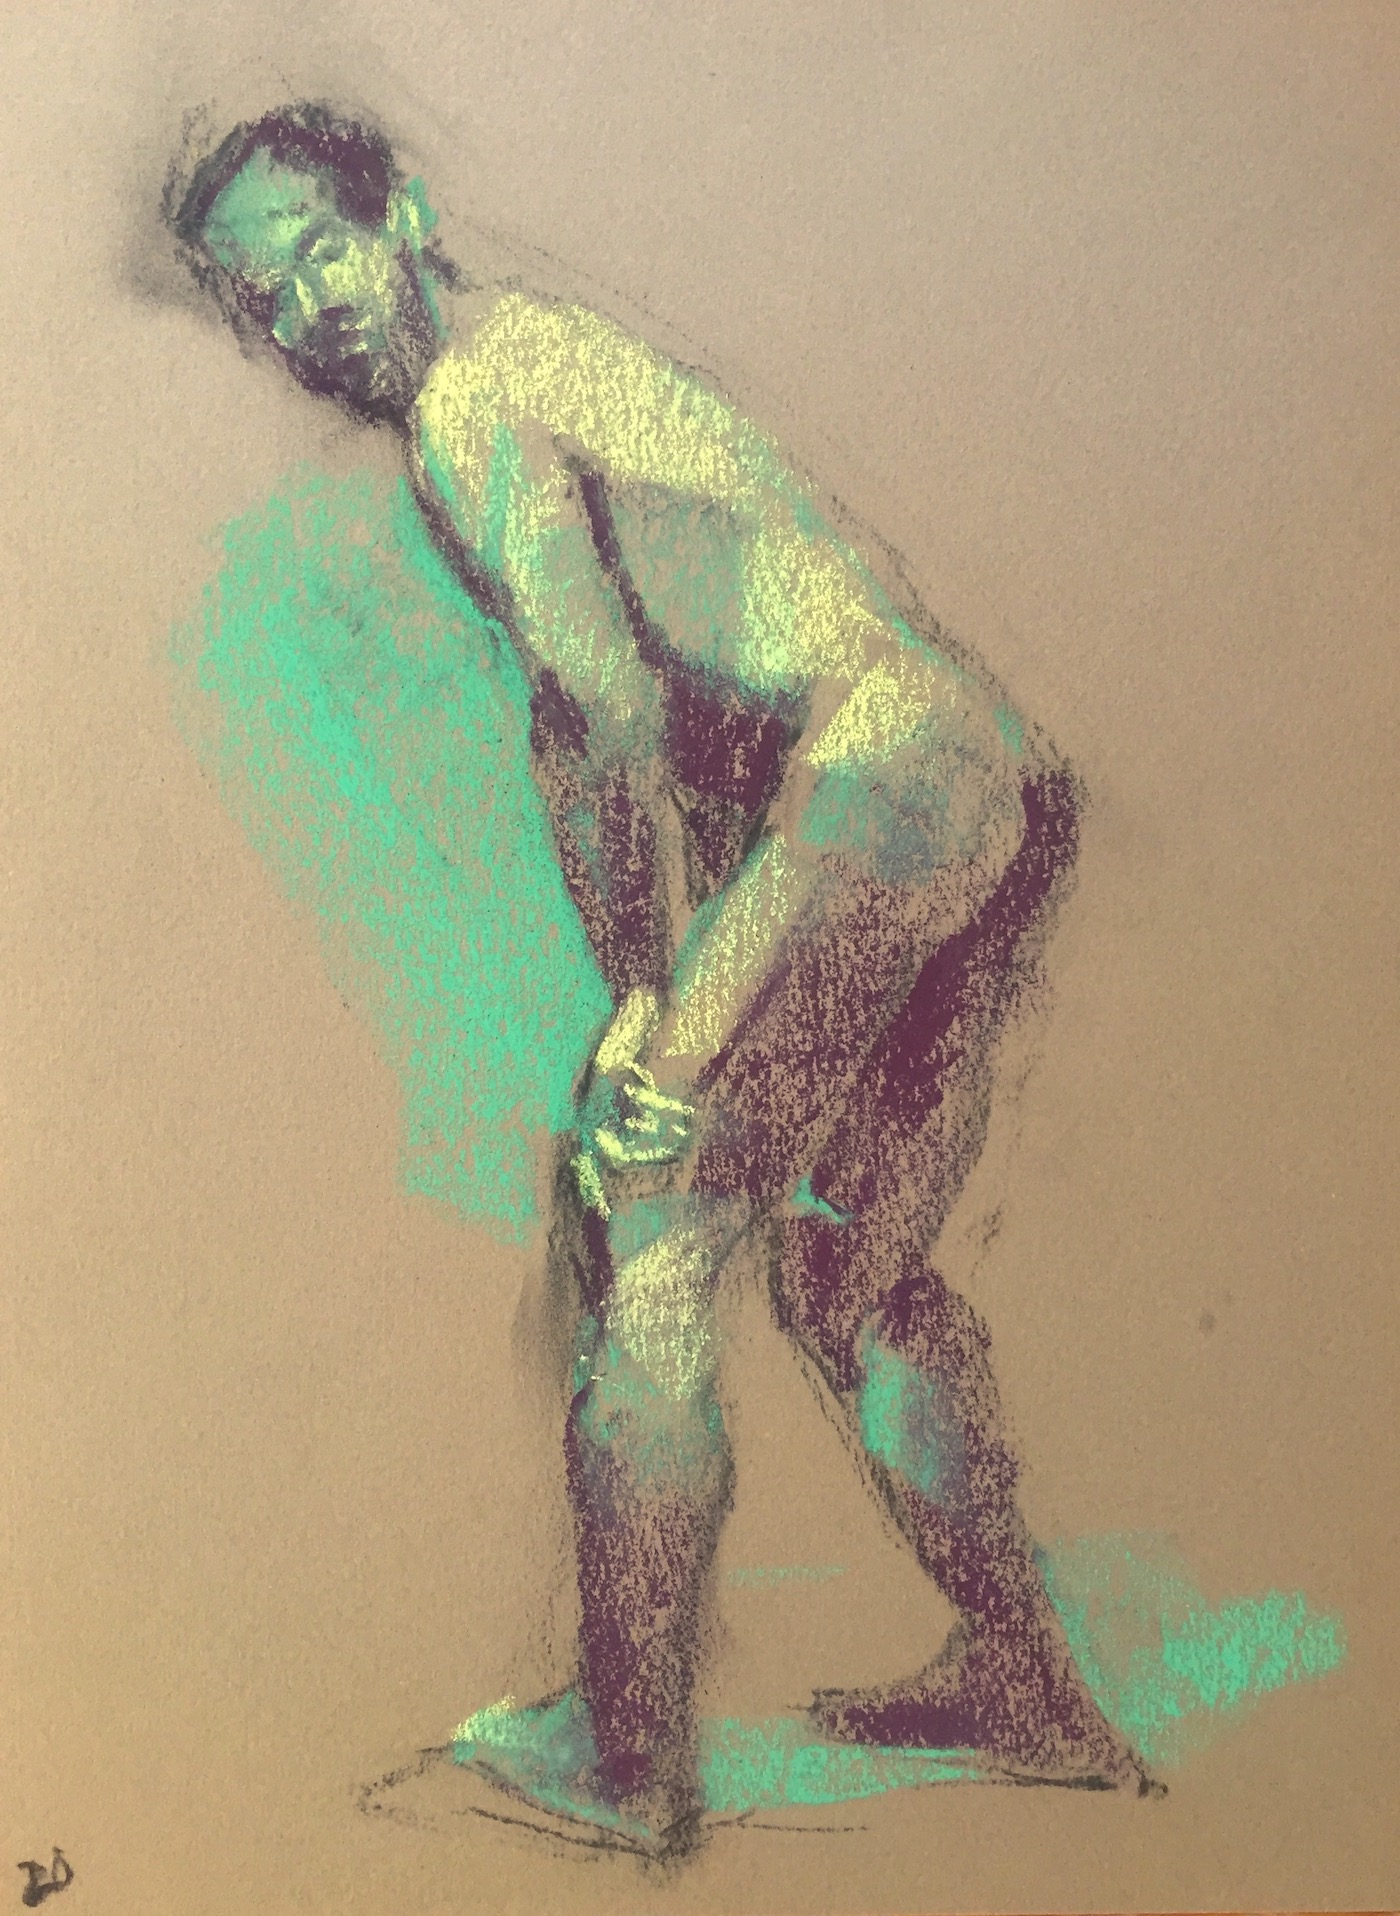 small box of pastels: Gail Sibley, "Jason 2," Unison pastels on Canson Mi-Teintes, 12 x 9 in. Available.